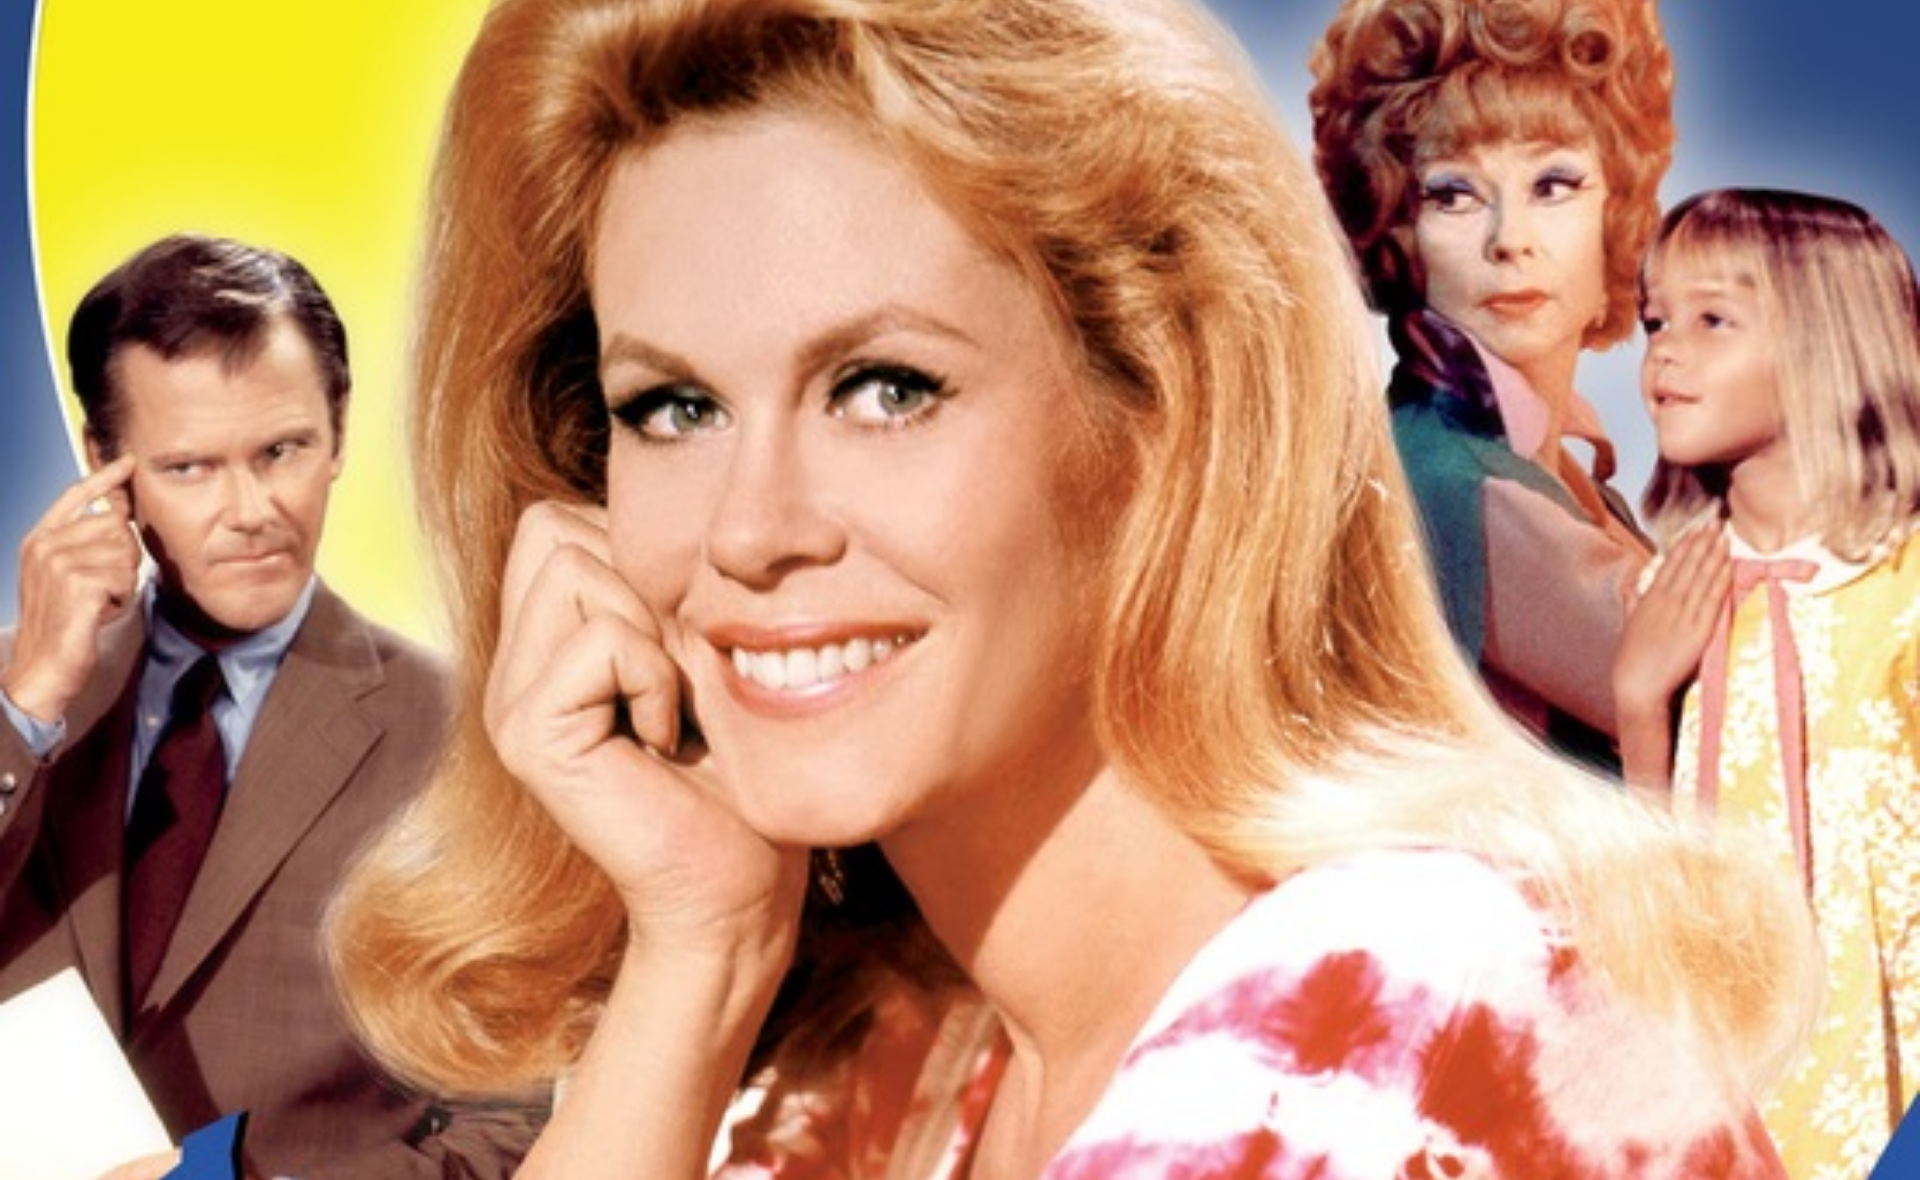 Whatever happened to the Cast from Bewitched